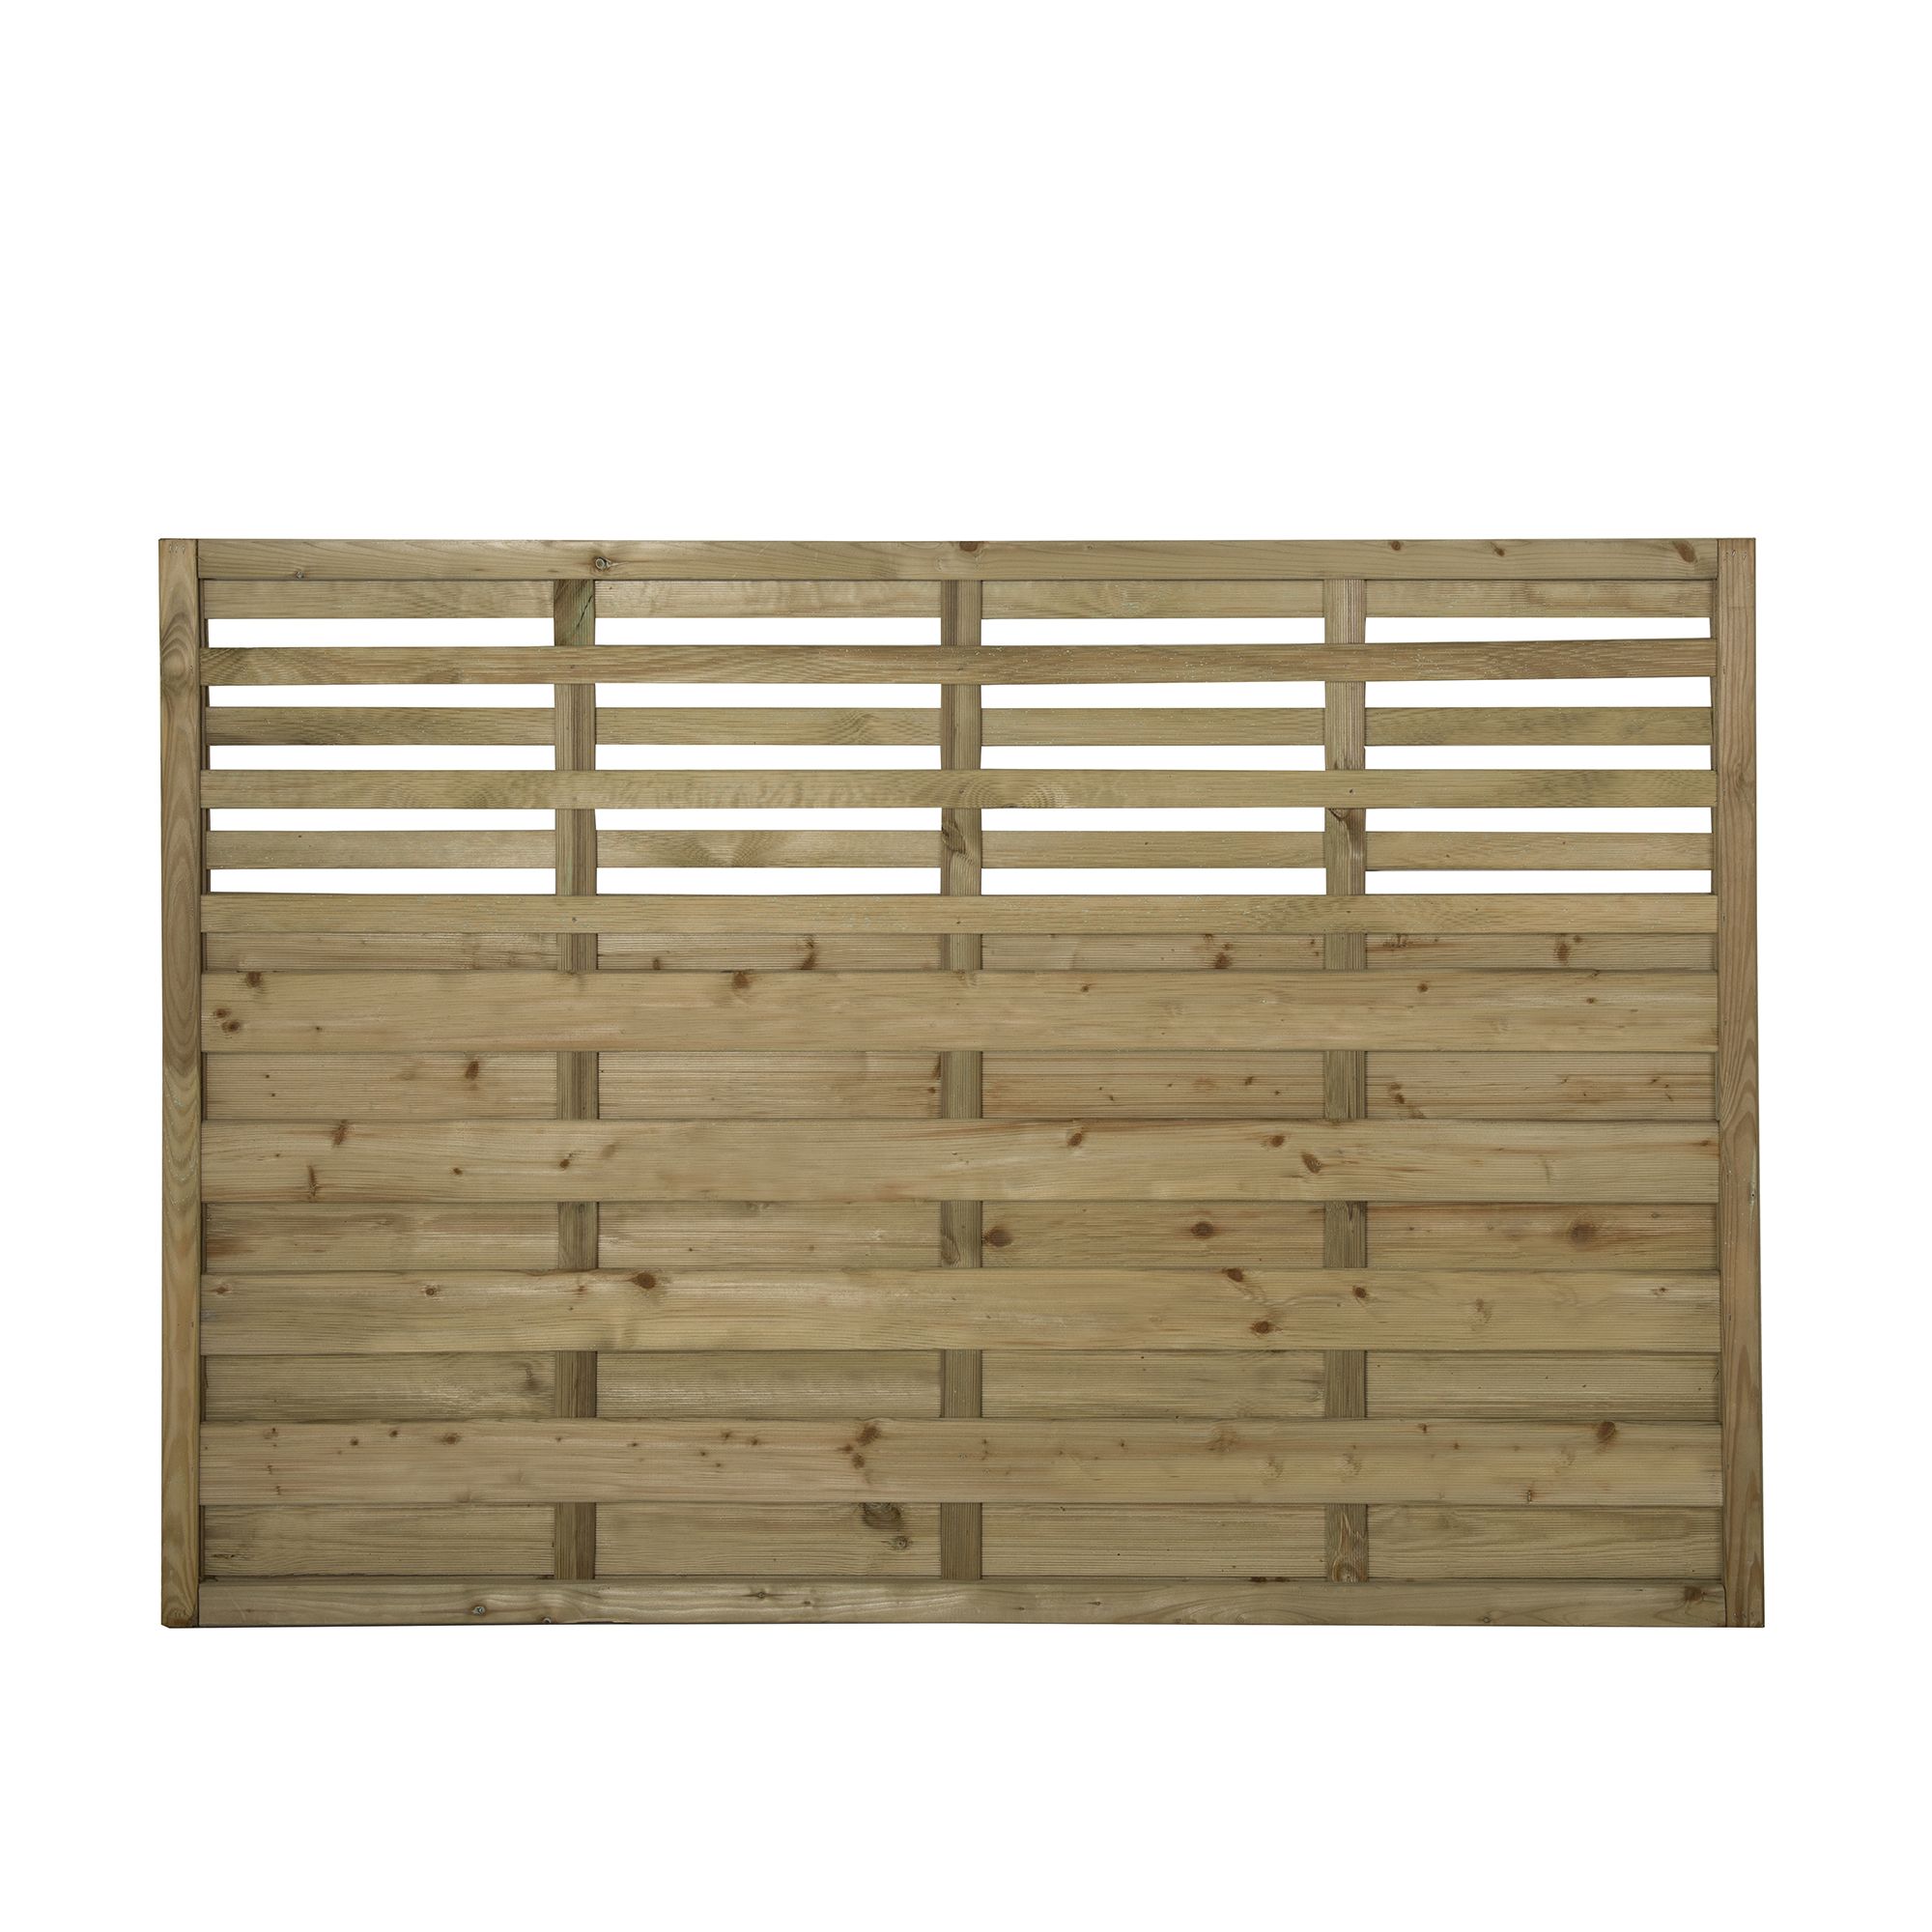 Forest Garden Contemporary Slatted Pressure treated 4ft Wooden Fence panel (W)1.8m (H)1.2m, Pack of 5